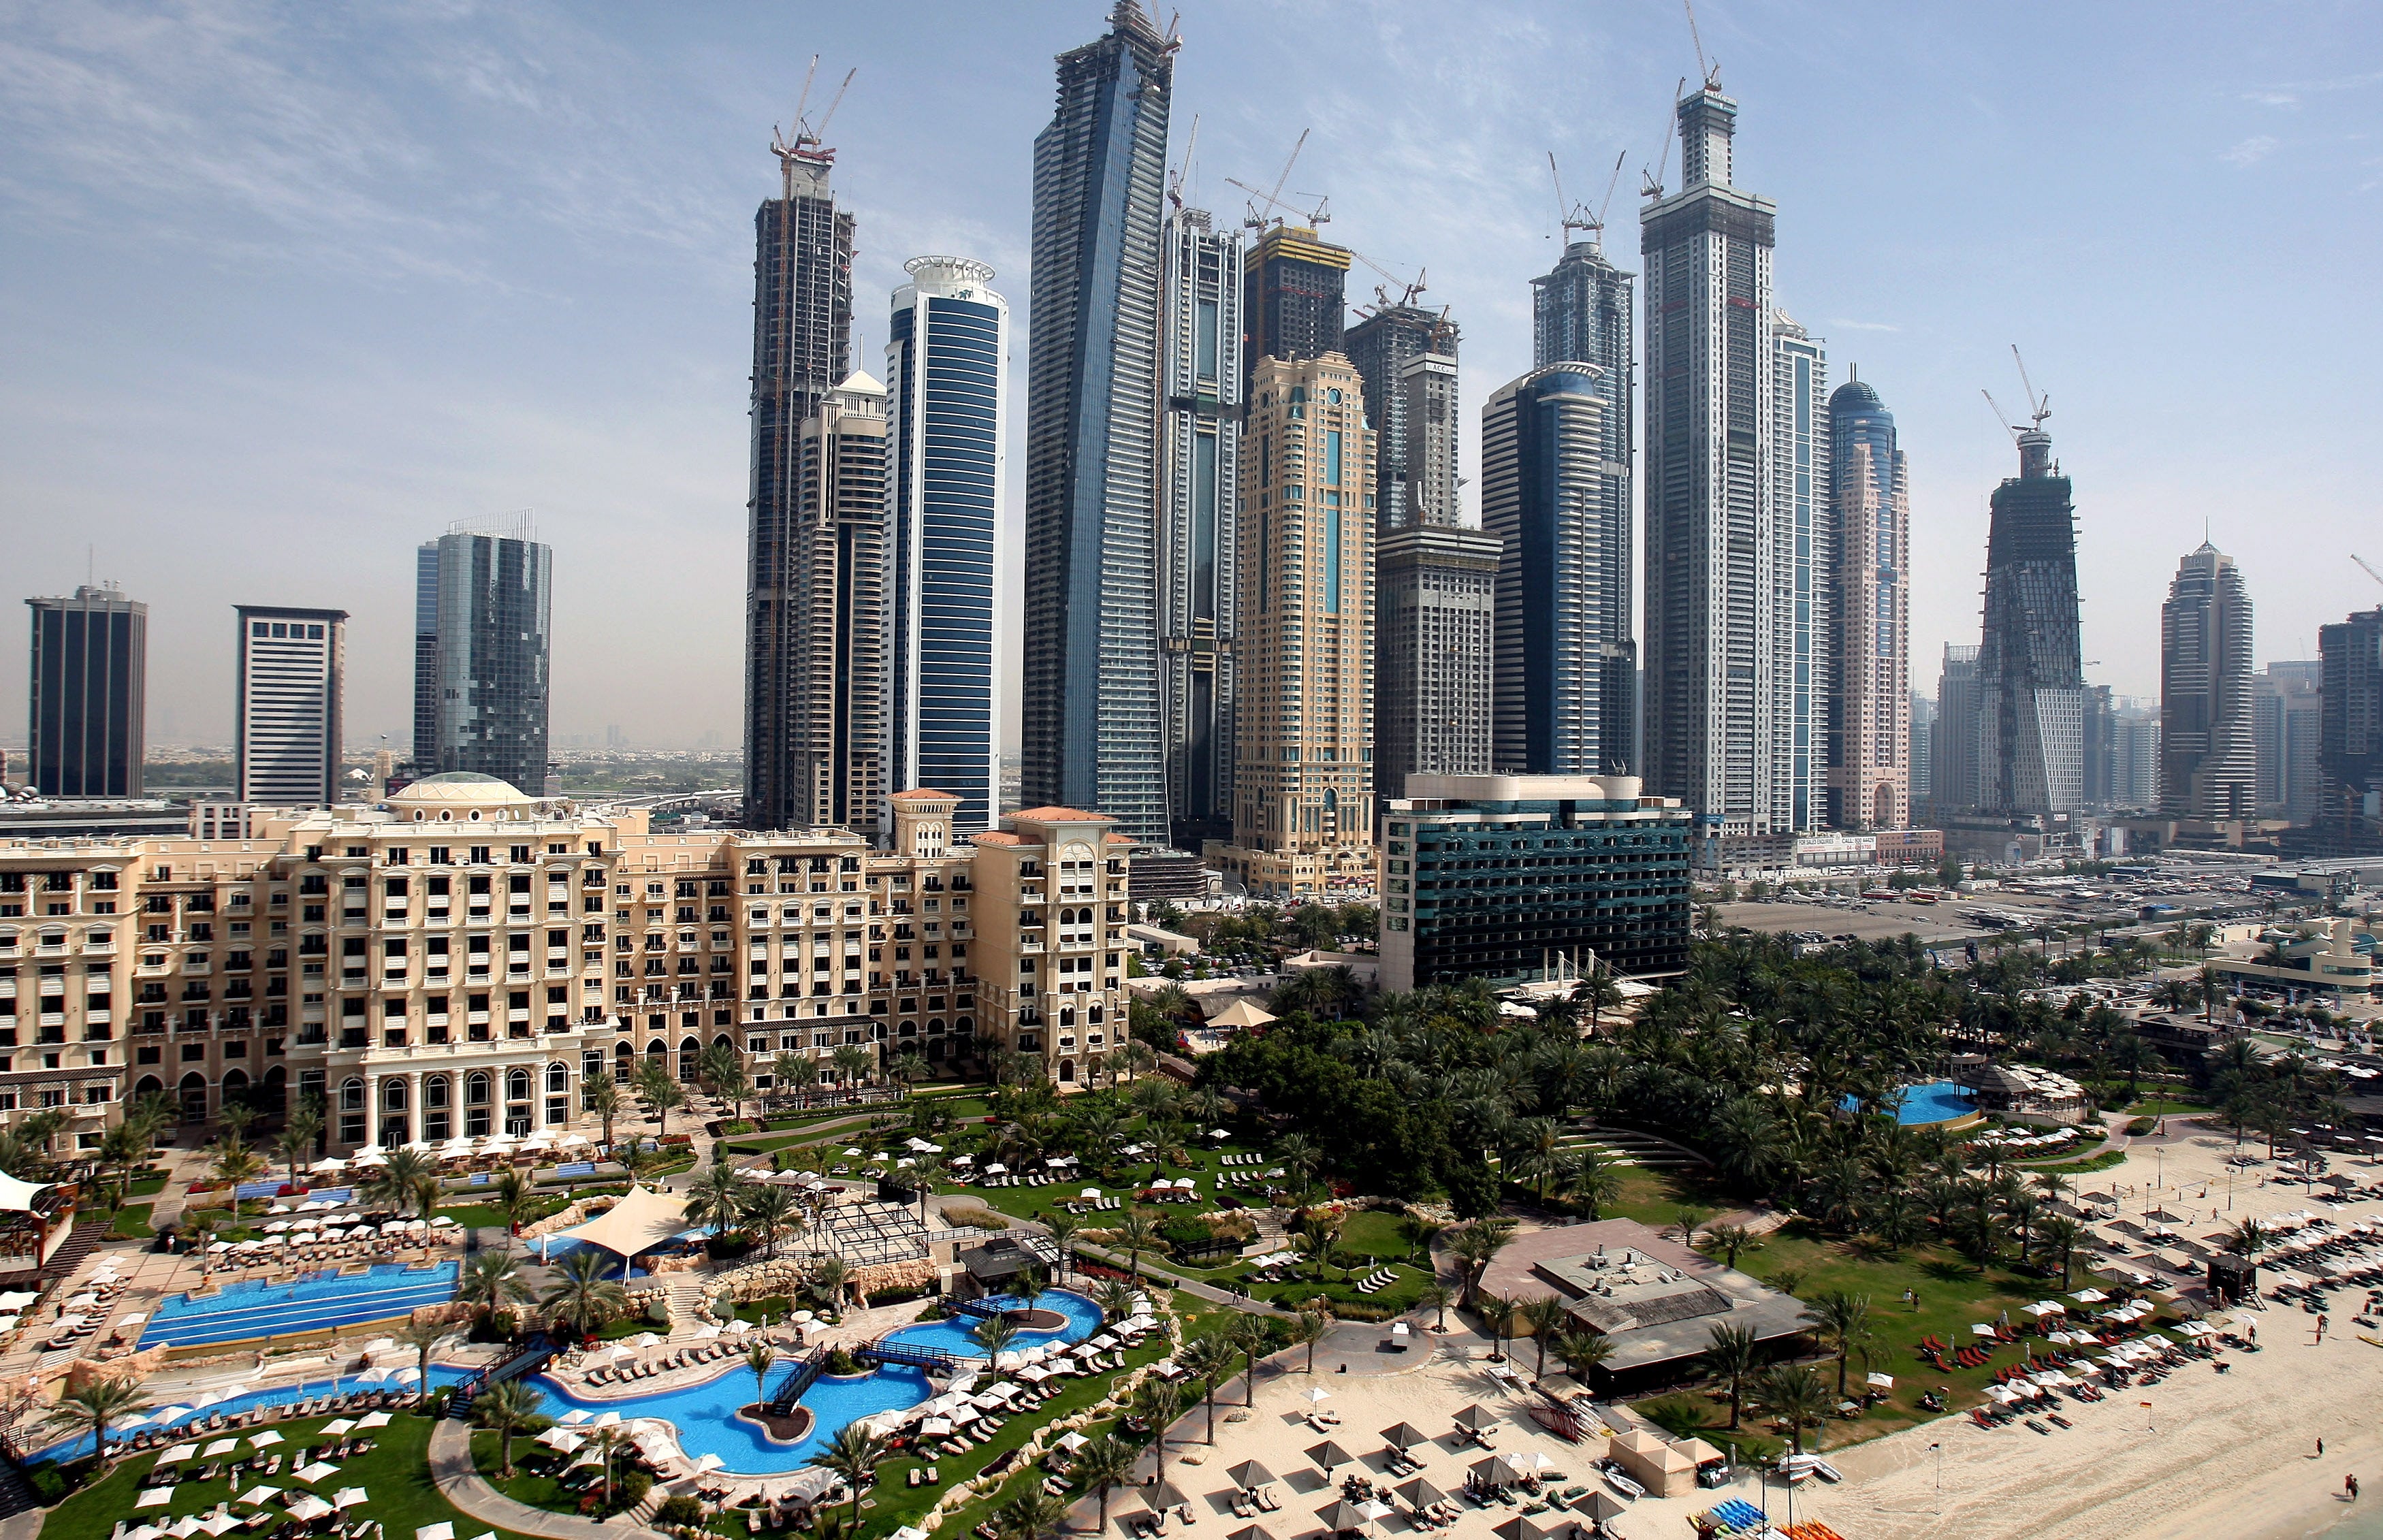 A view of luxury hotels and skyscrapers at the Dubai Marina, where the shoot is said to have taken place